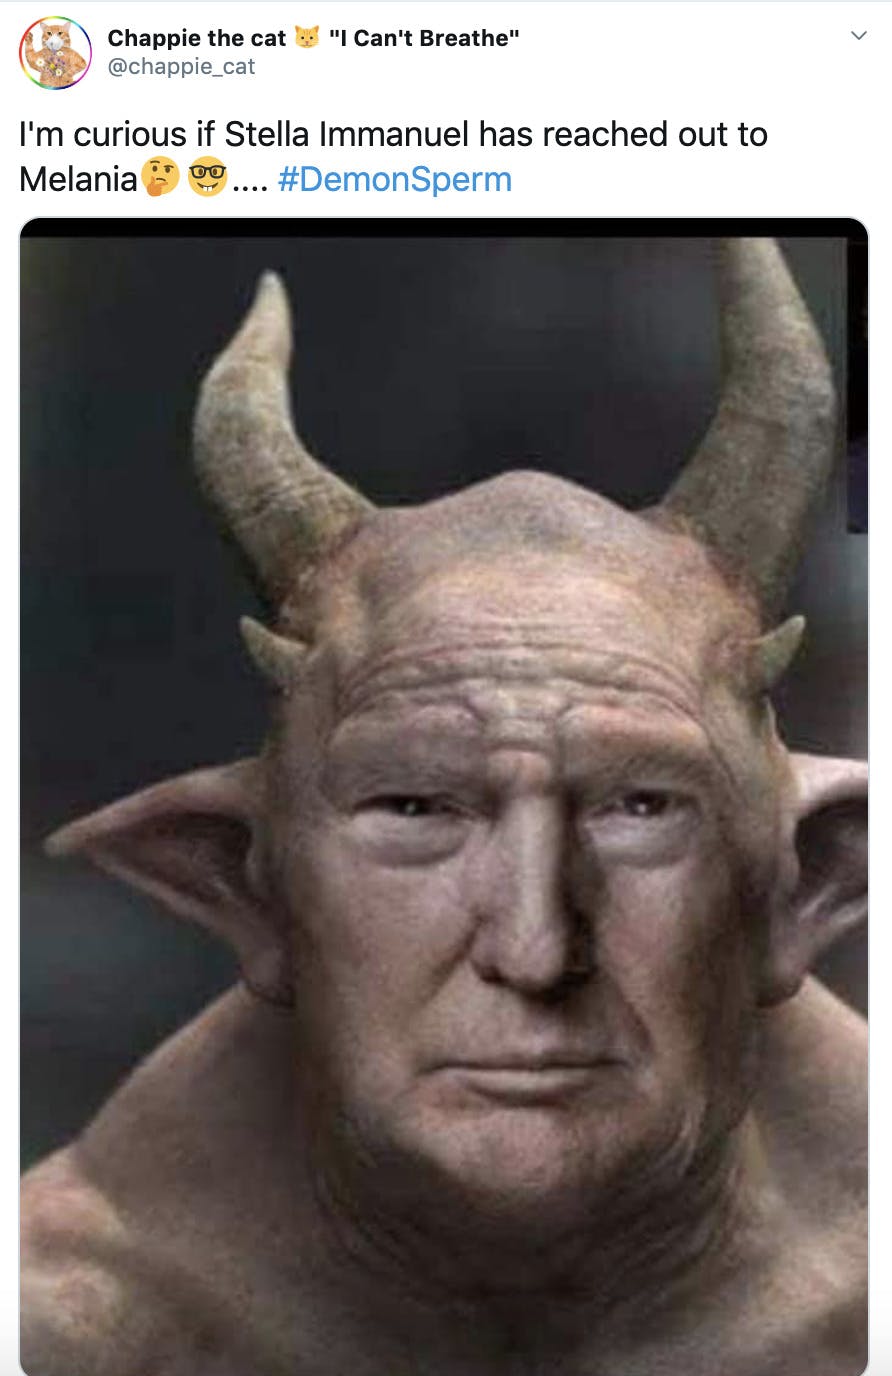 "I'm curious if Stella Immanuel has reached out to MelaniaThinking faceNerd face.... #DemonSperm" creepy photoshop of Trump as a demon with horns and fleshy pointed ears